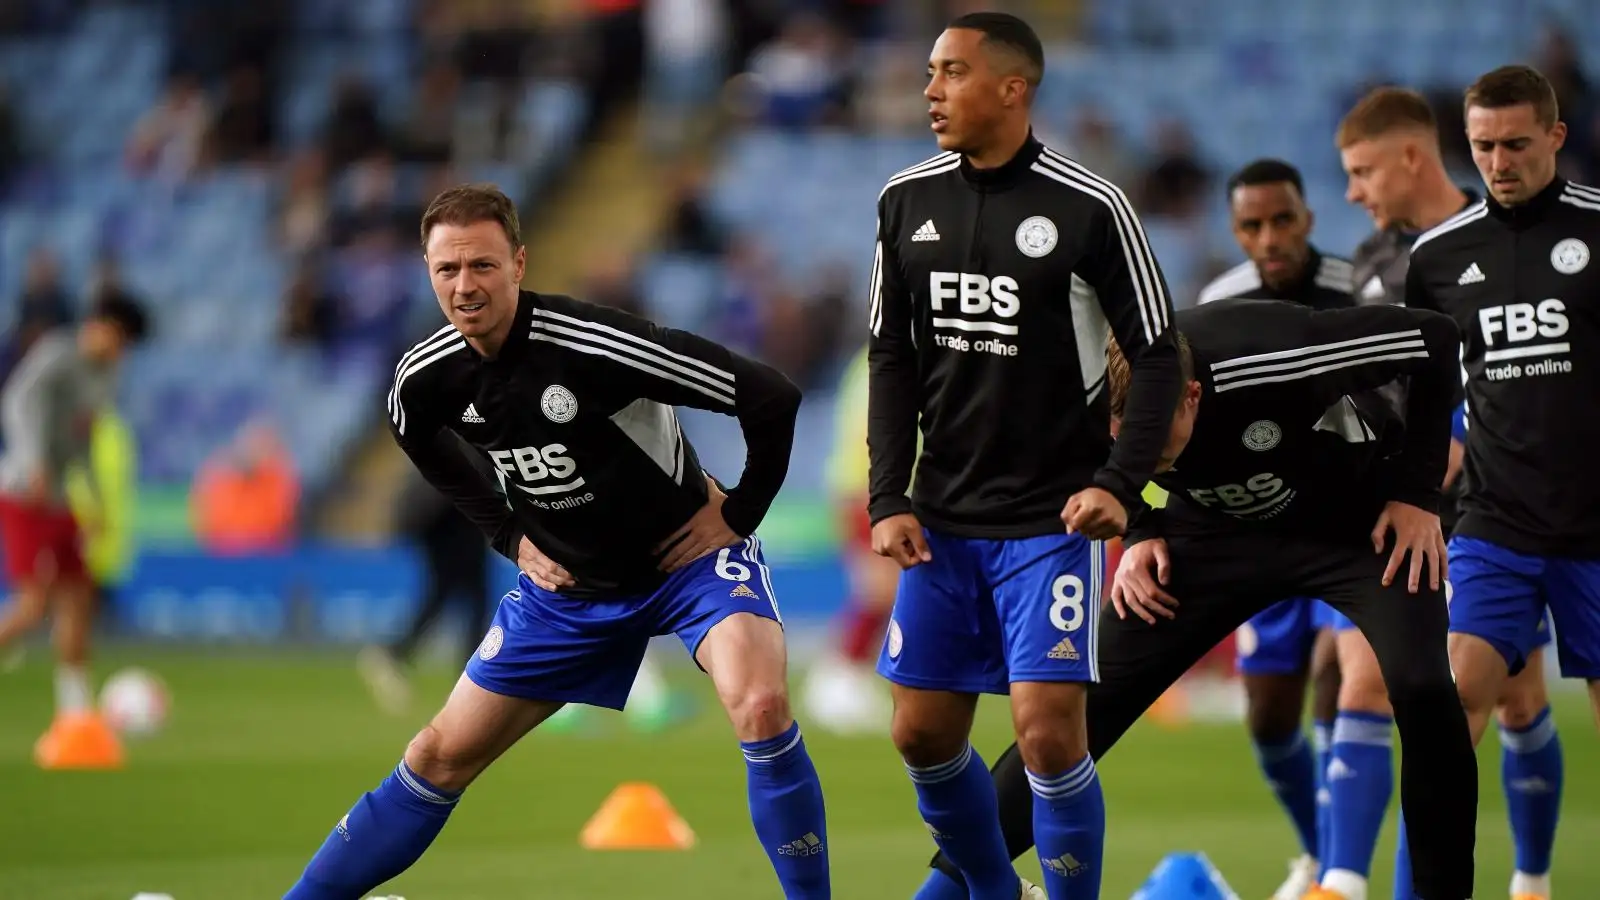 Leicester City players Jonny Evans and Youri Tielemans warming up before a match against Liverpool